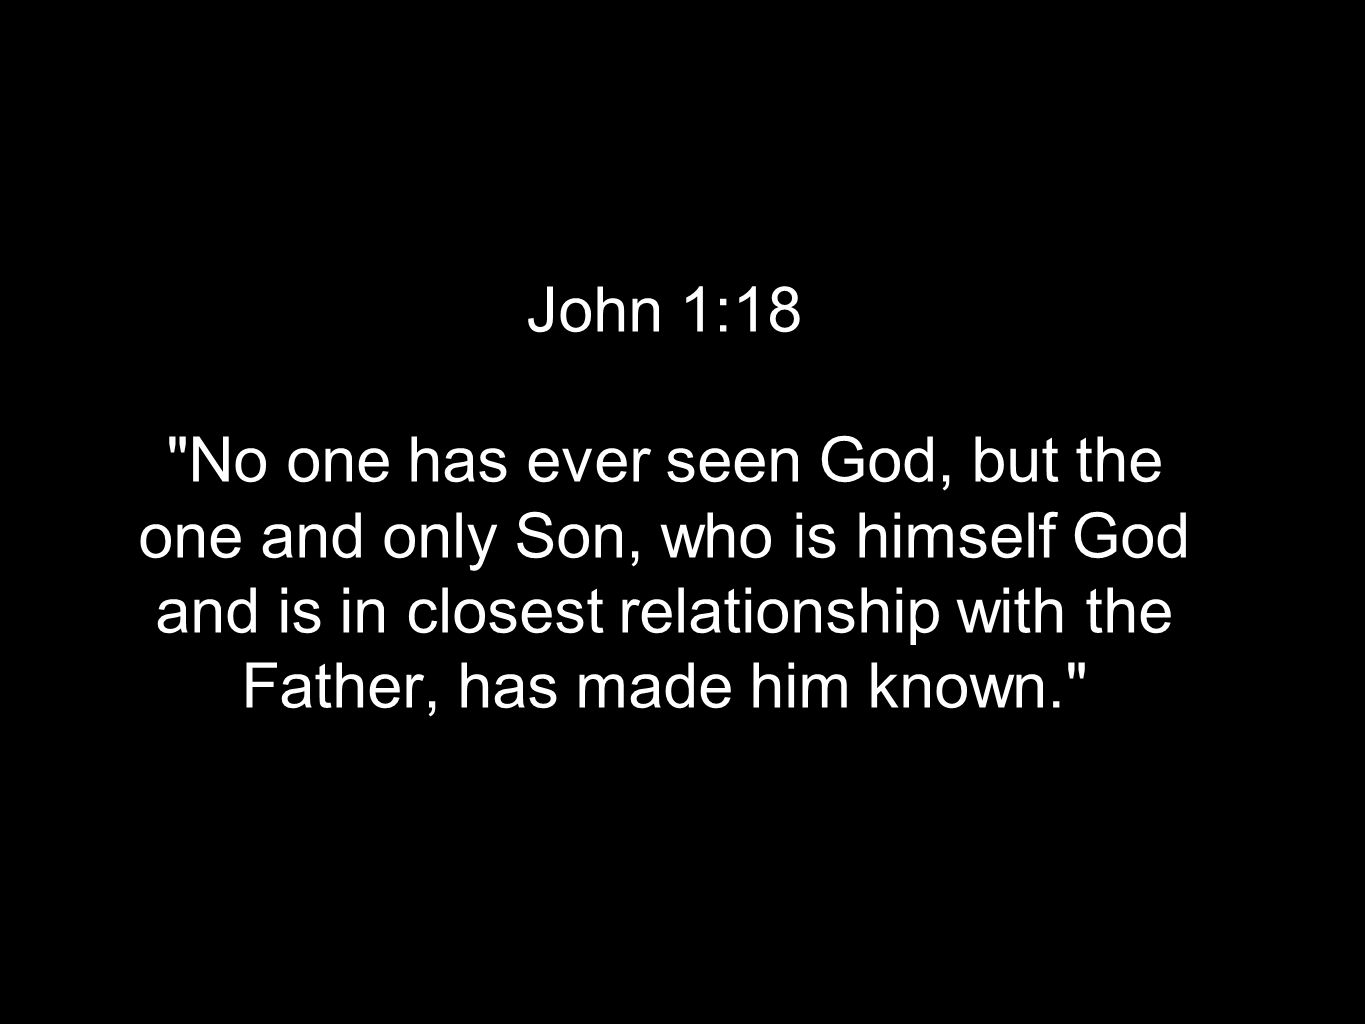 John 1:18 No one has ever seen God, but the one and only Son, who is himself God and is in closest relationship with the Father, has made him known.